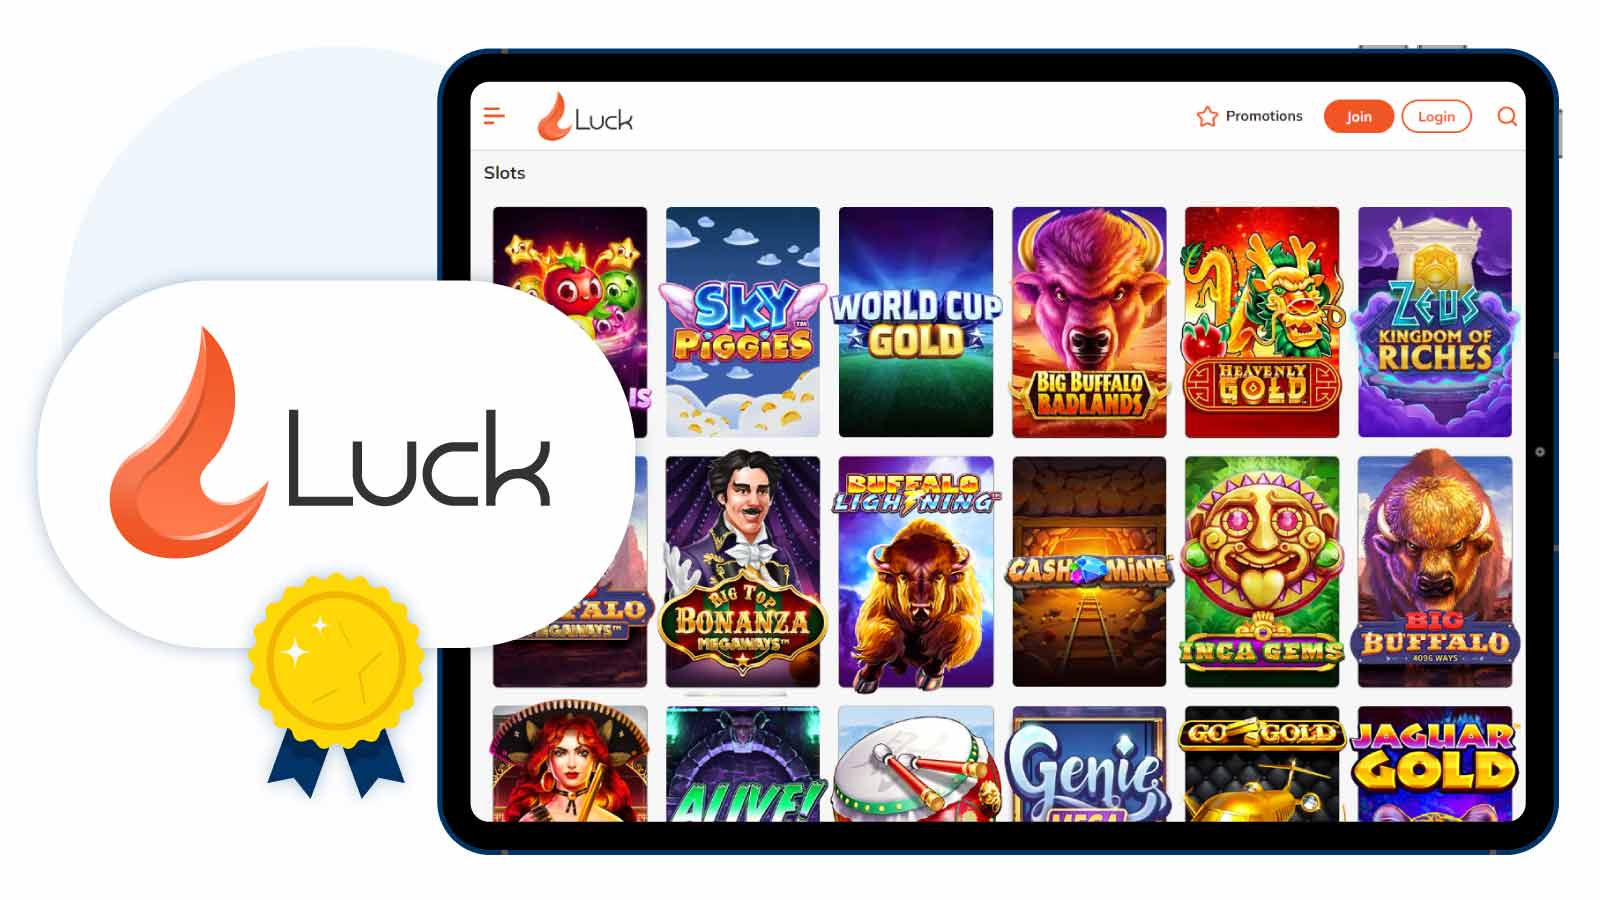 Luck.com Casino – Overall Best New Slot Site in the UK